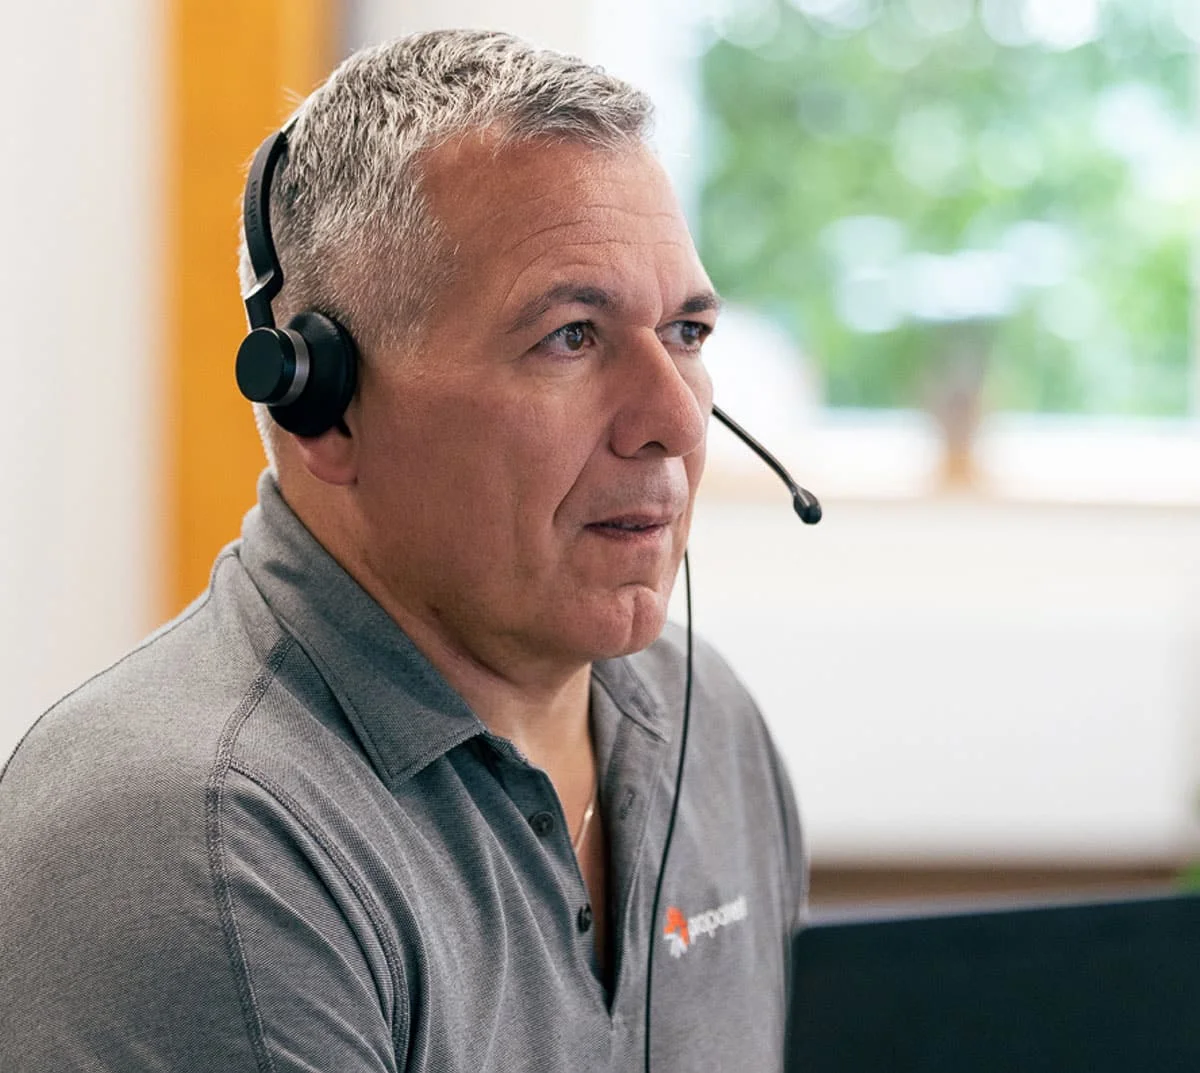 A man in a grey Proponent branded shirt, wearing a headset